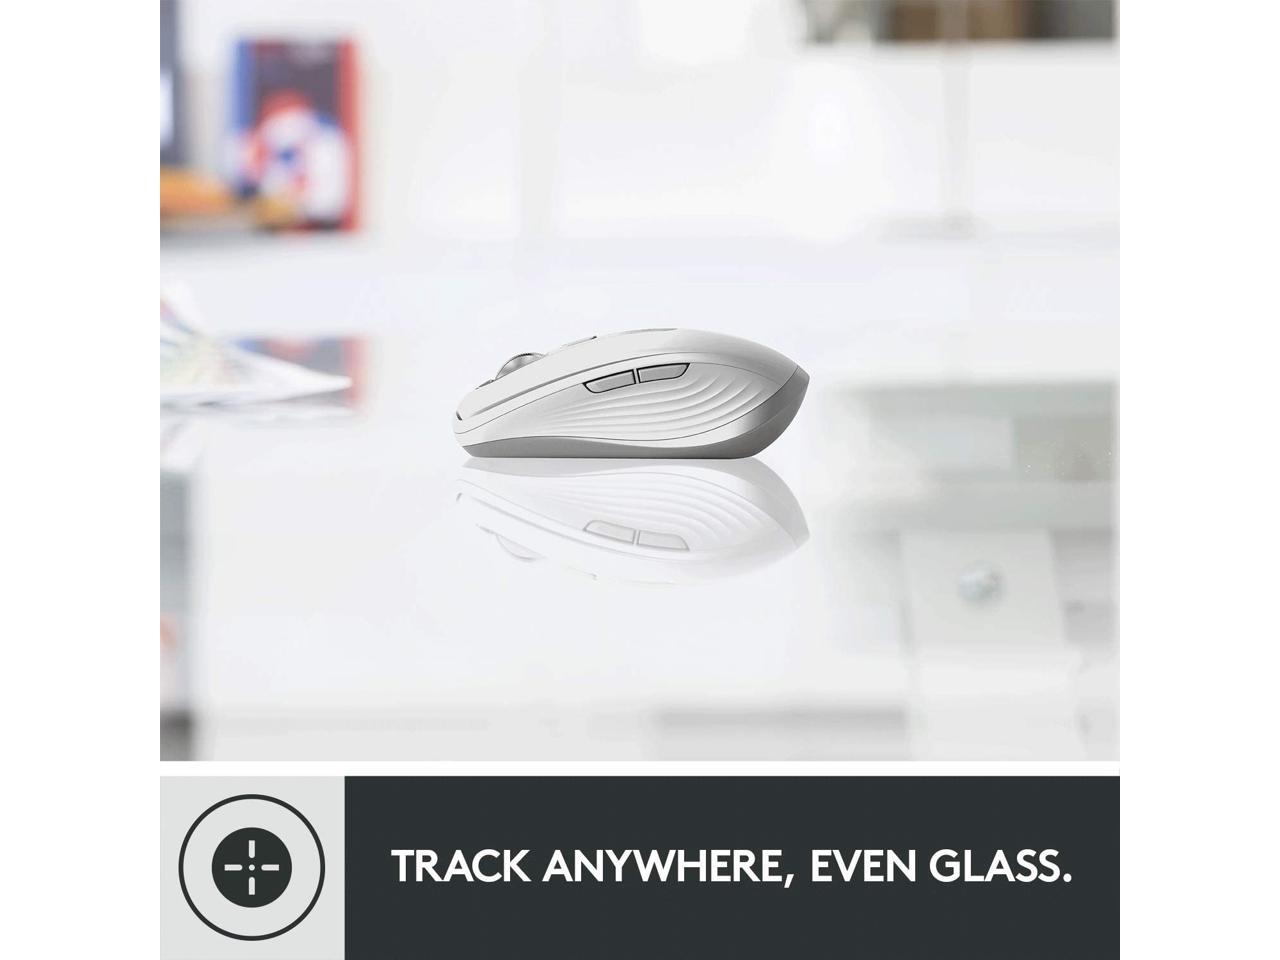 Logitech MX Anywhere 3 Compact Performance Mouse, Wireless, Comfort, Fast Scrolling, Any Surface, Portable, 4000DPI, Customizabl